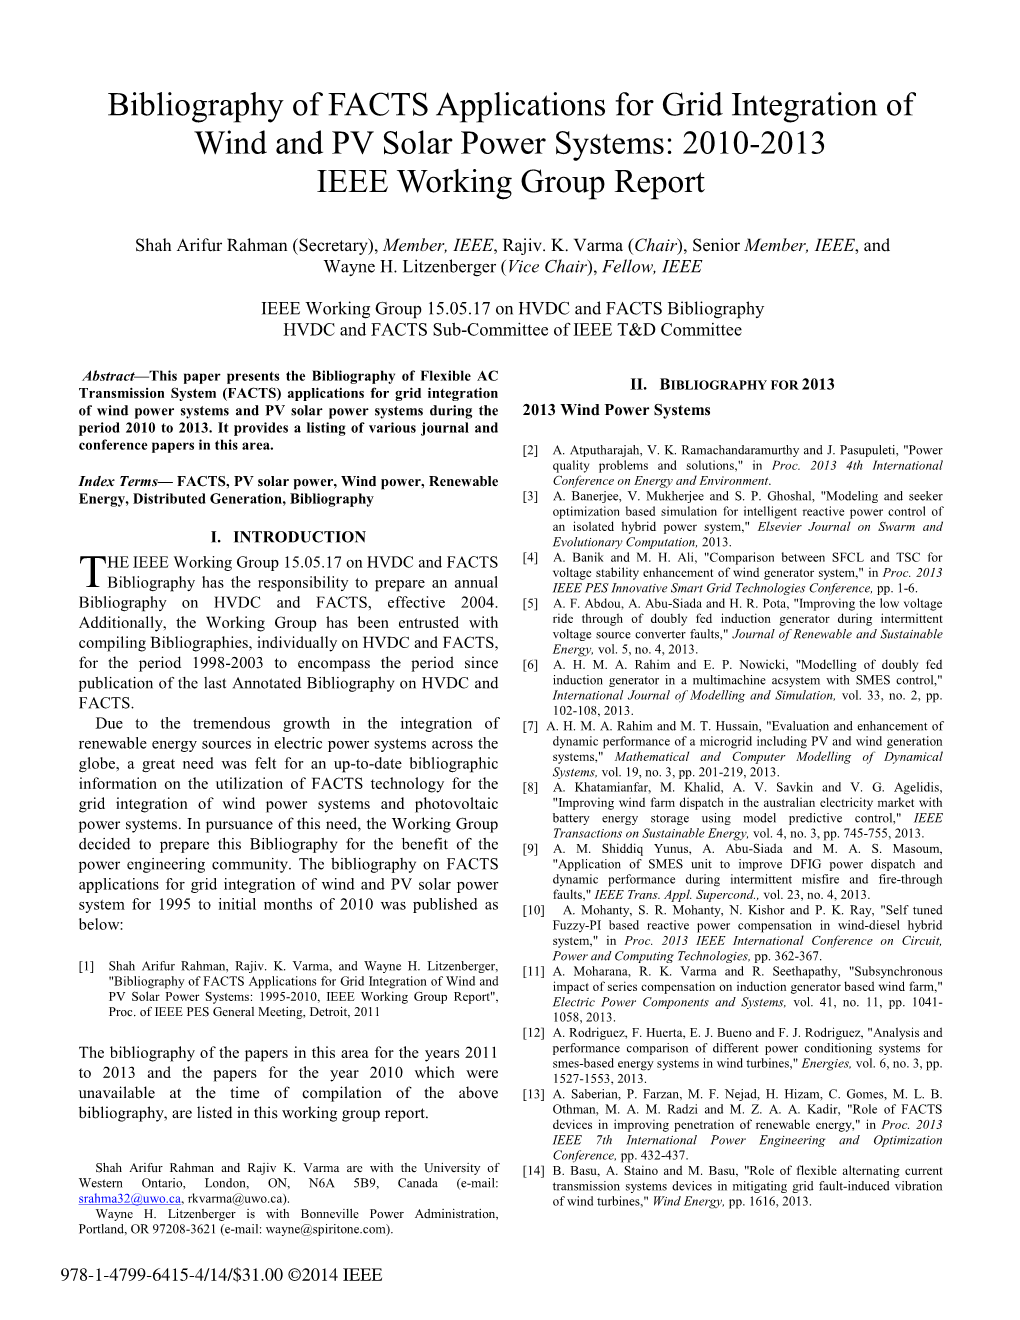 Bibliography of FACTS Applications for Grid Integration of Wind and PV Solar Power Systems: 2010-2013 IEEE Working Group Report